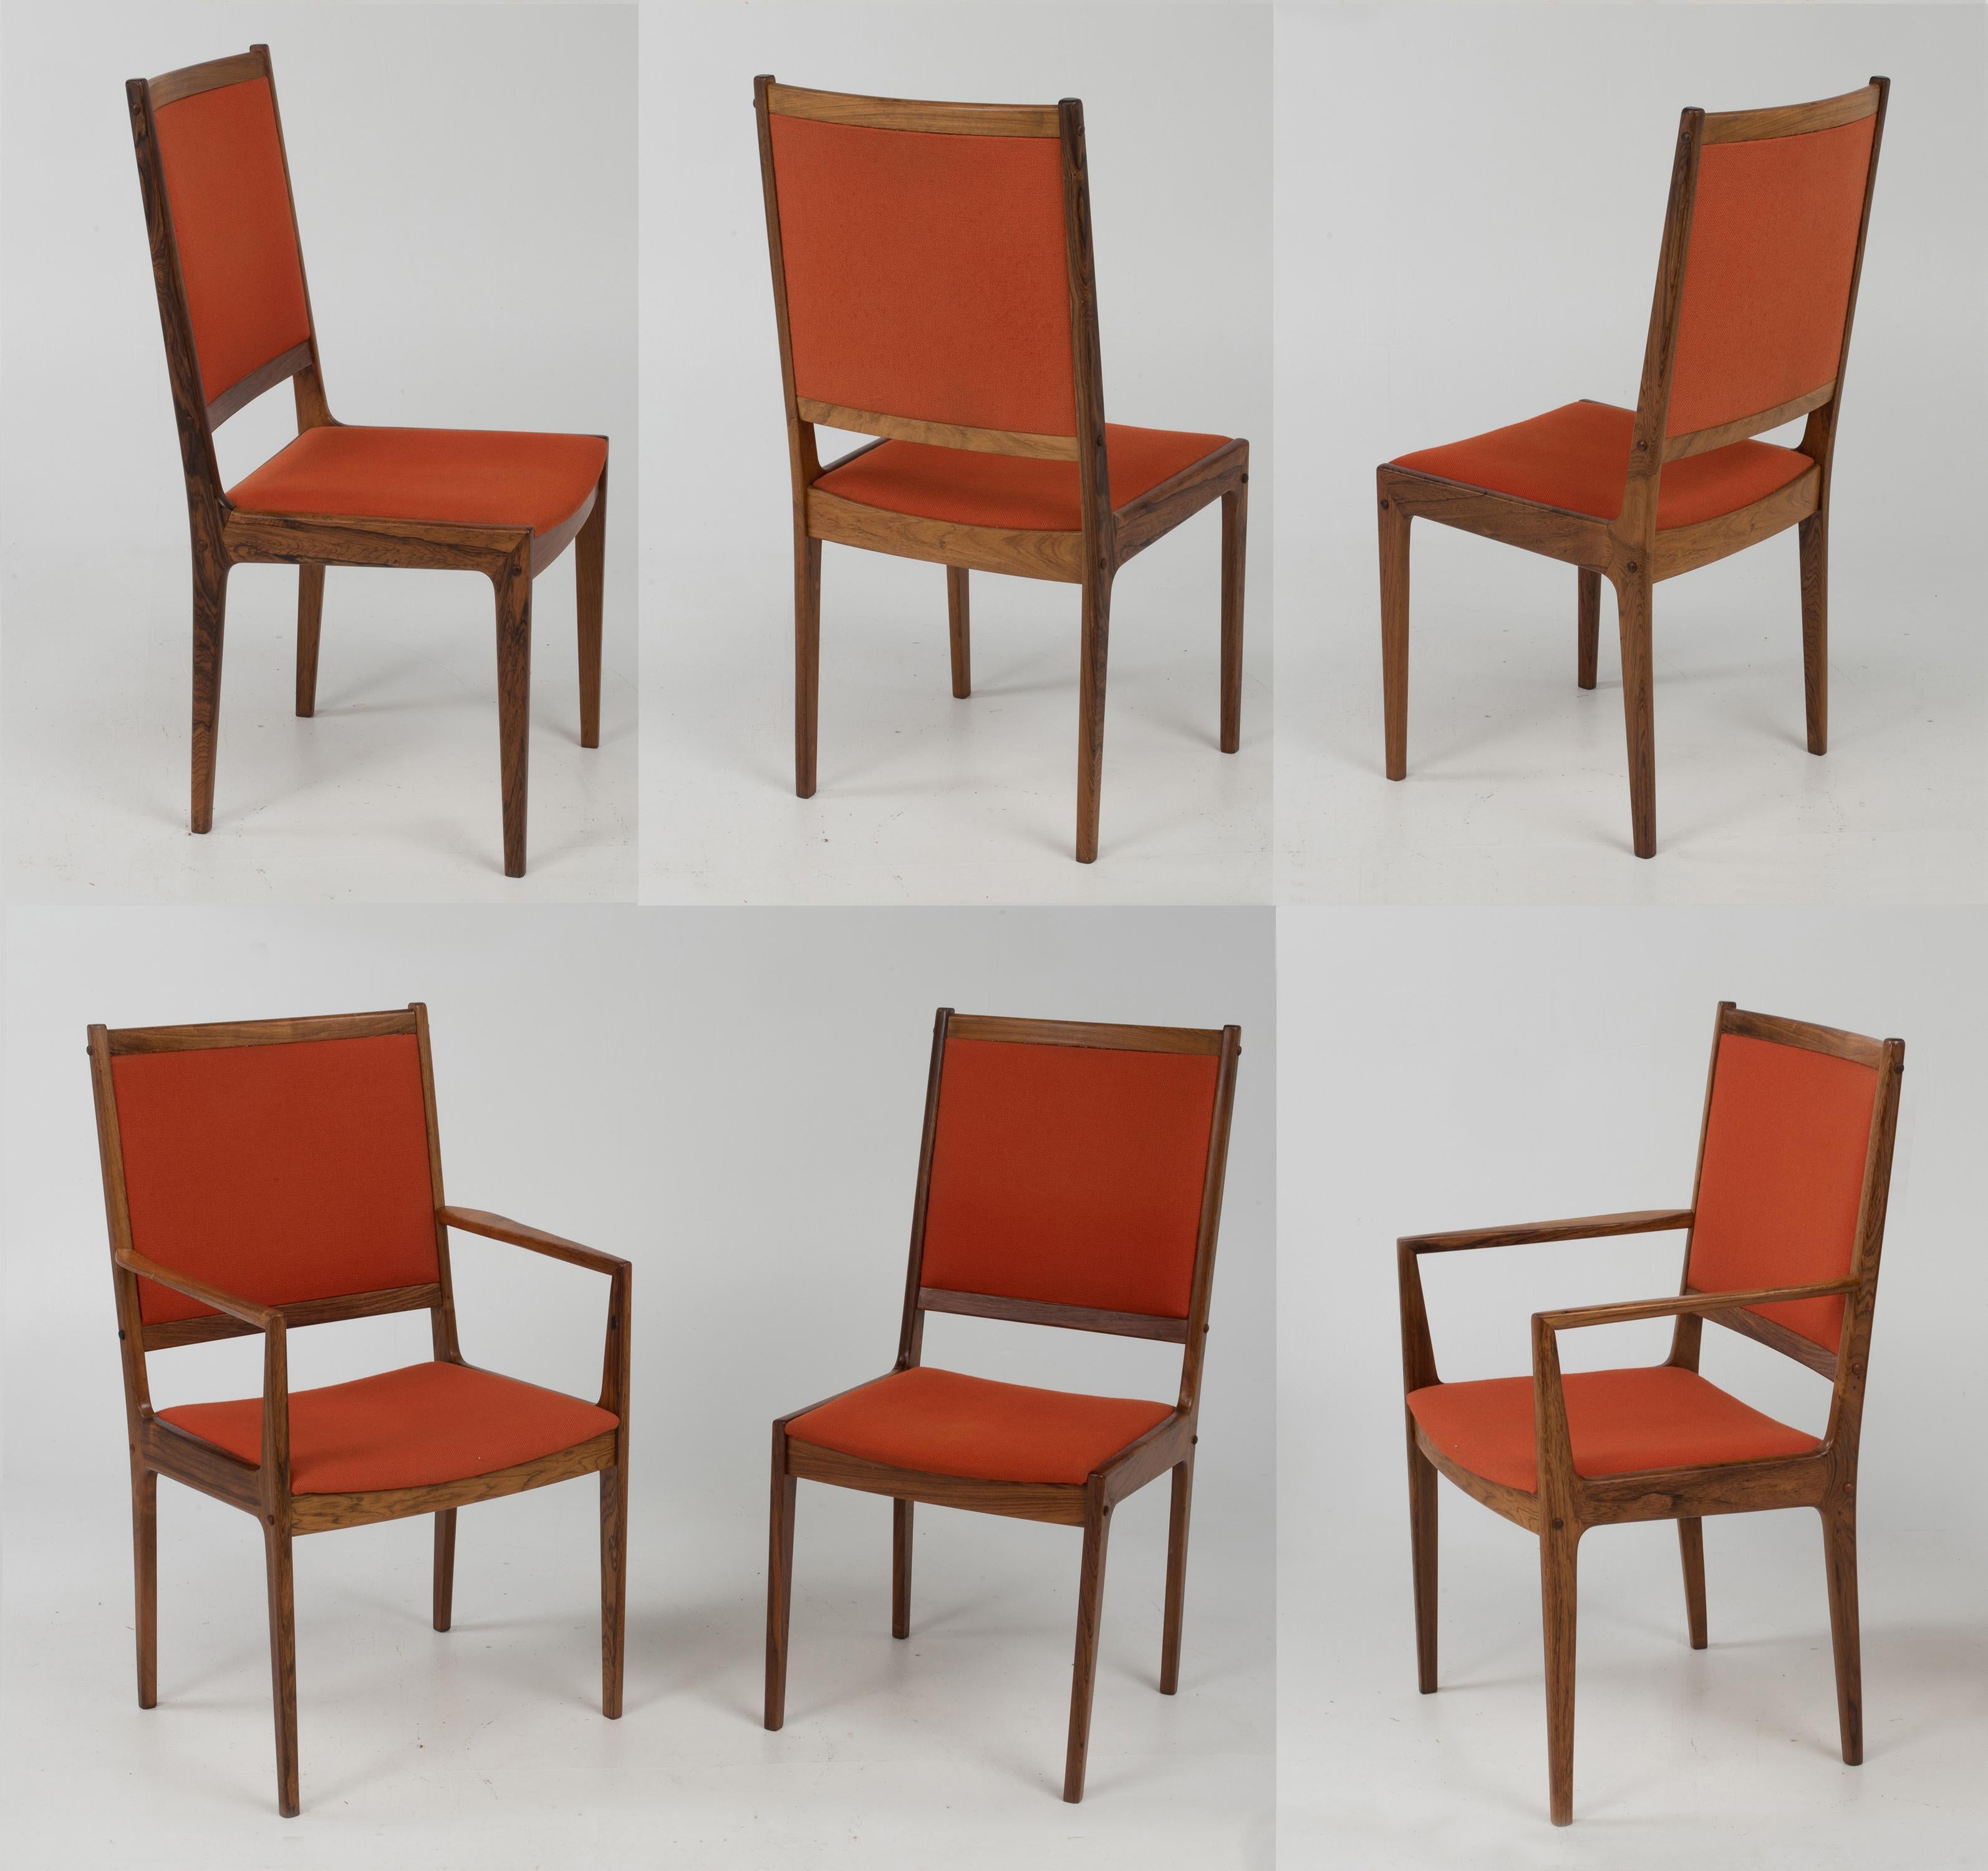 Nice clean set of 1970s era rosewood dining chairs by Bernhard Pedersen & Son upholstered in the original orange fabric. Marked 